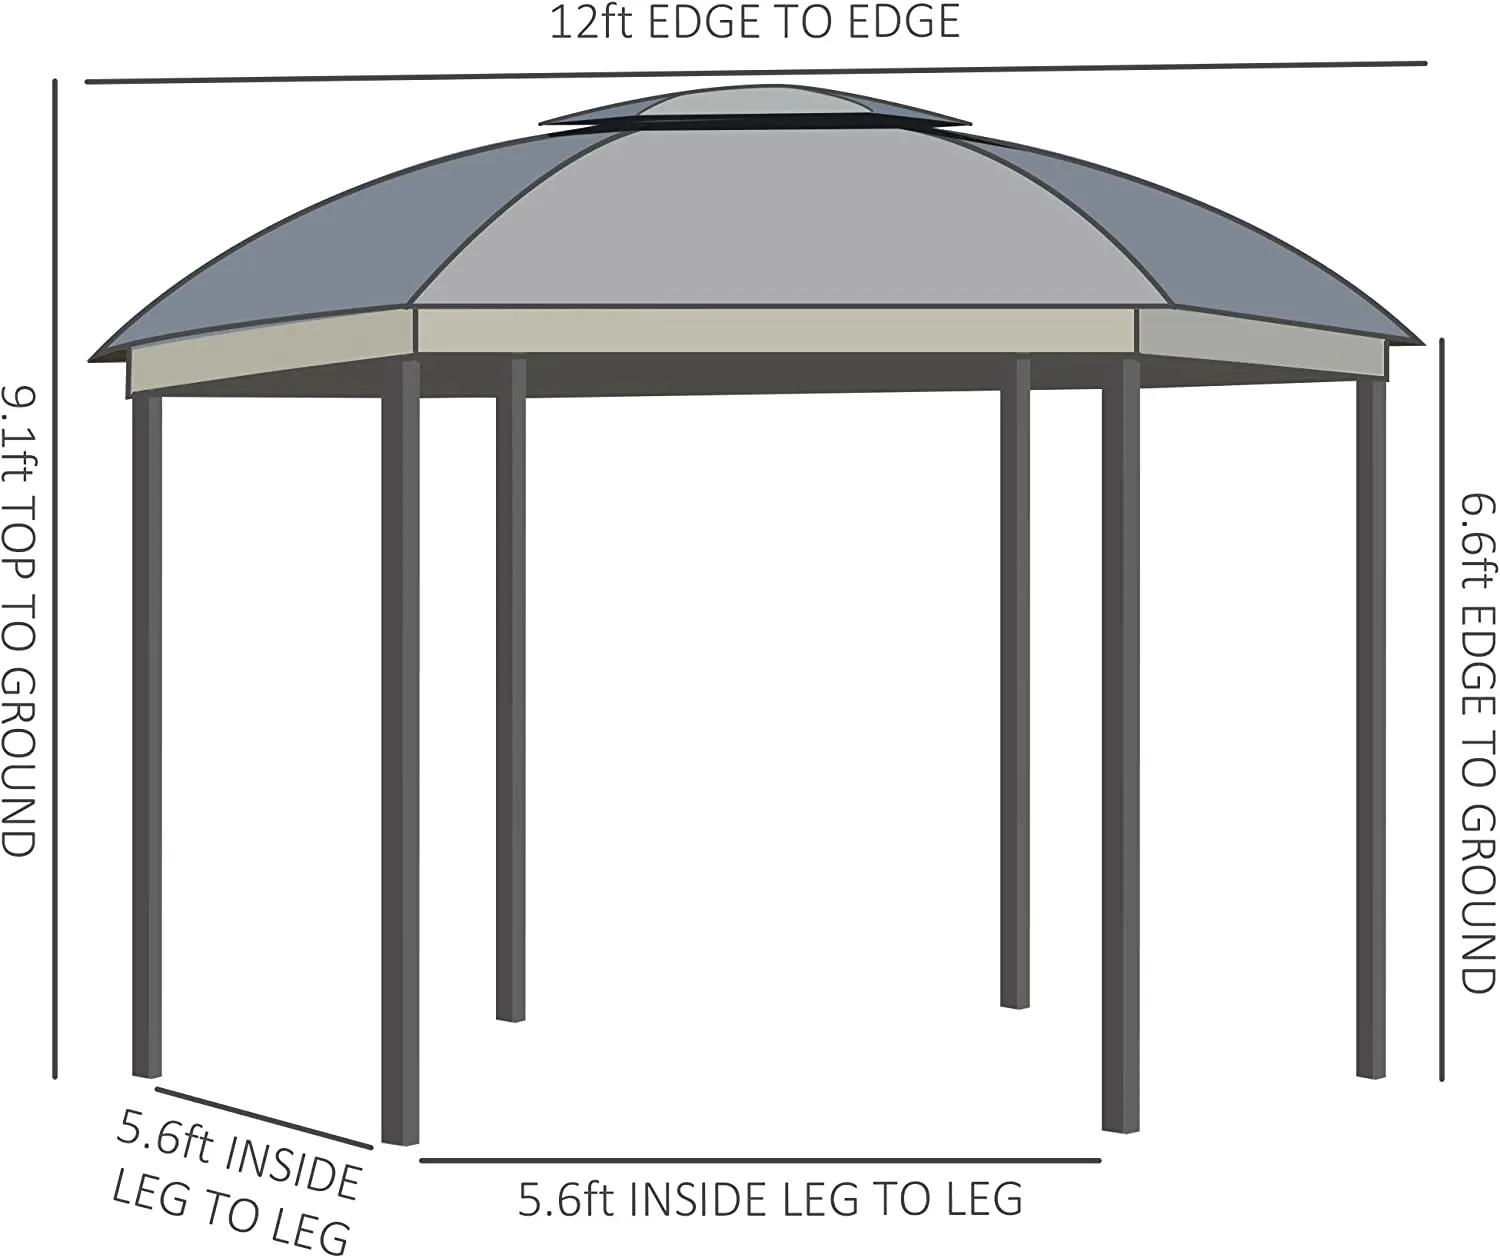 gray Oxford waterproof and durable, suitable for outdoor courtyard garden, awnings gazebo canopy top-4.jpg